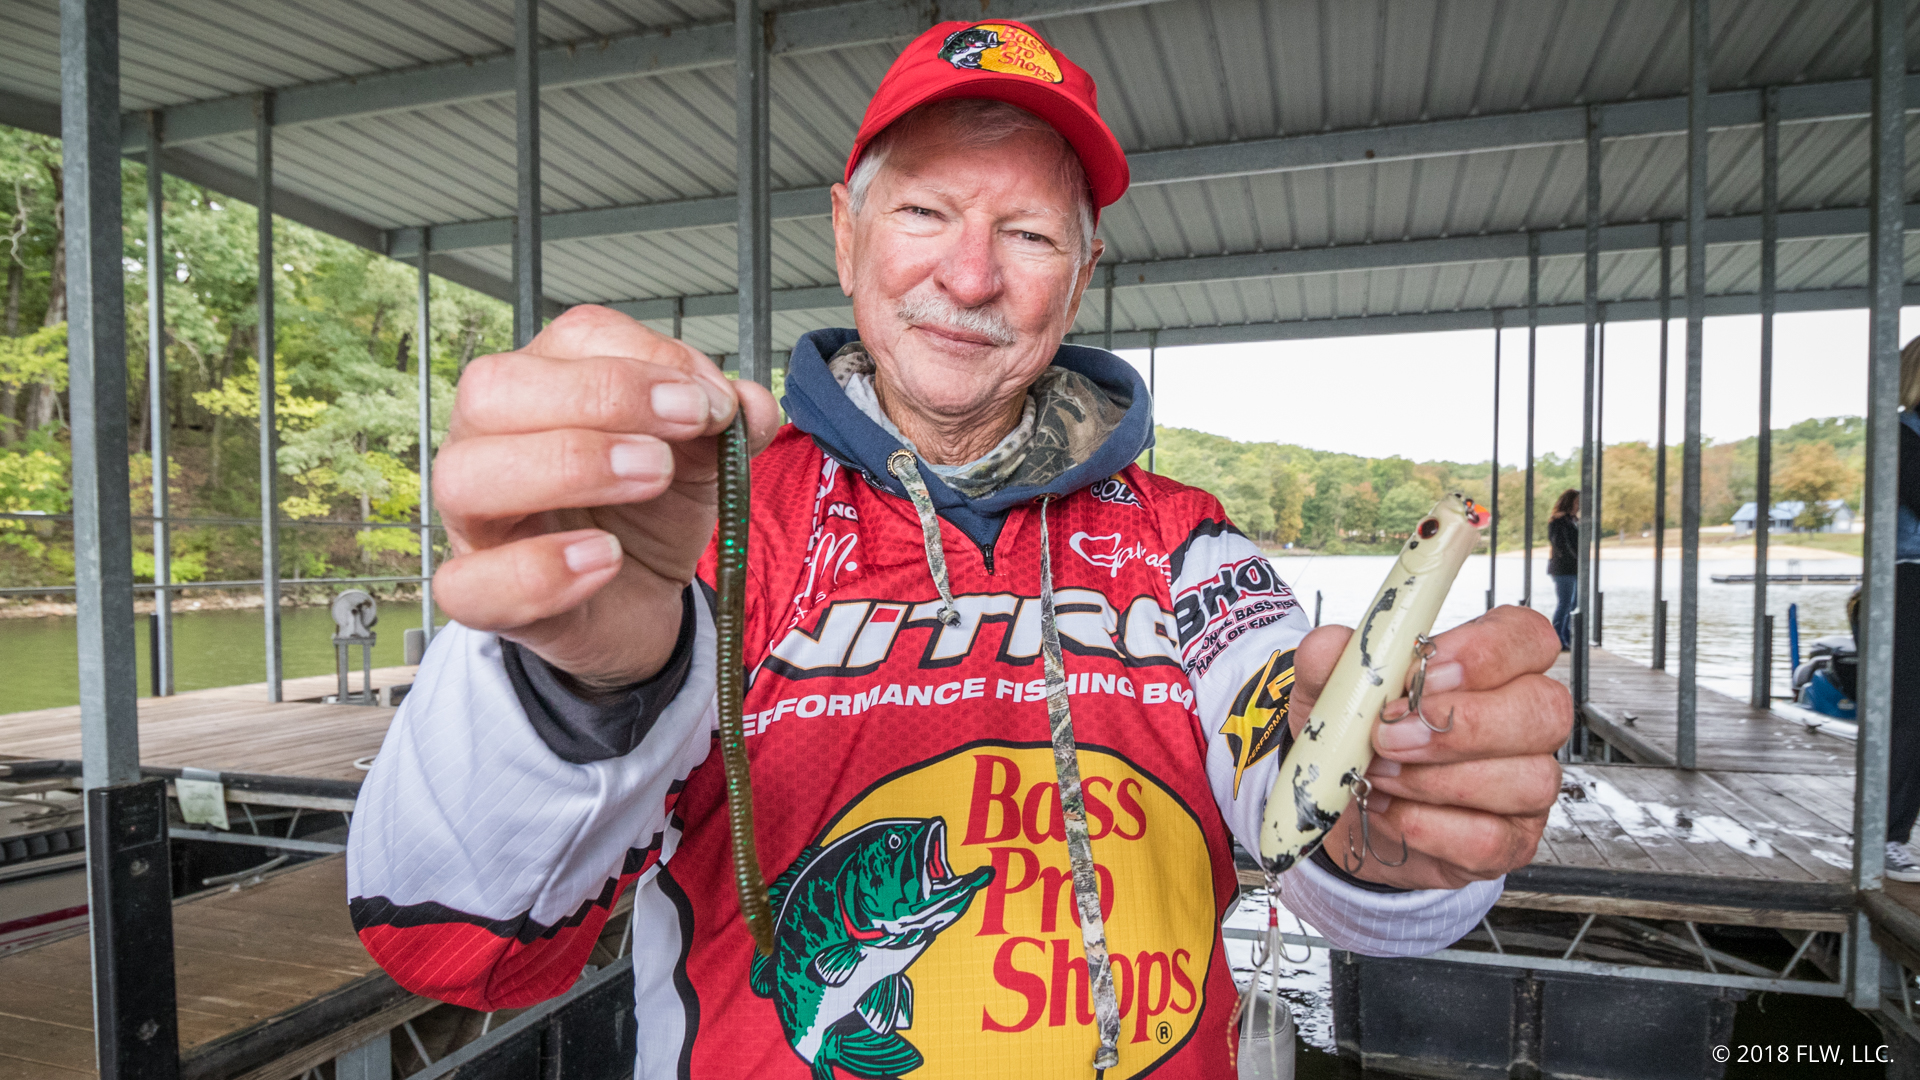 Top 10 Baits from Lake of the Ozarks - Major League Fishing